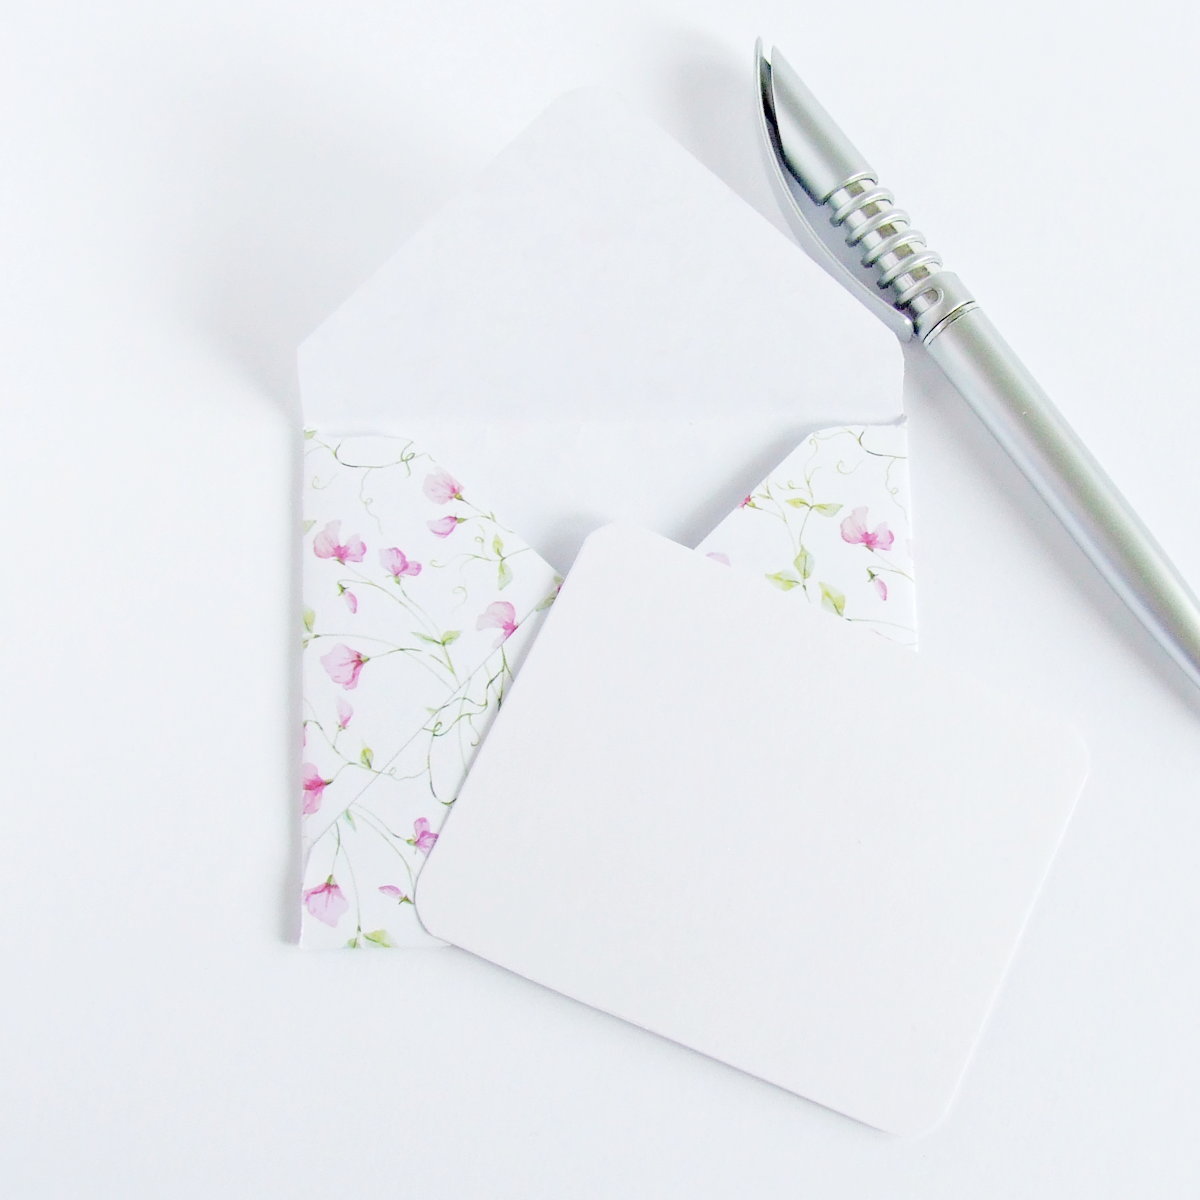 Handmade floral gift envelope with white notecard by Bonschelle